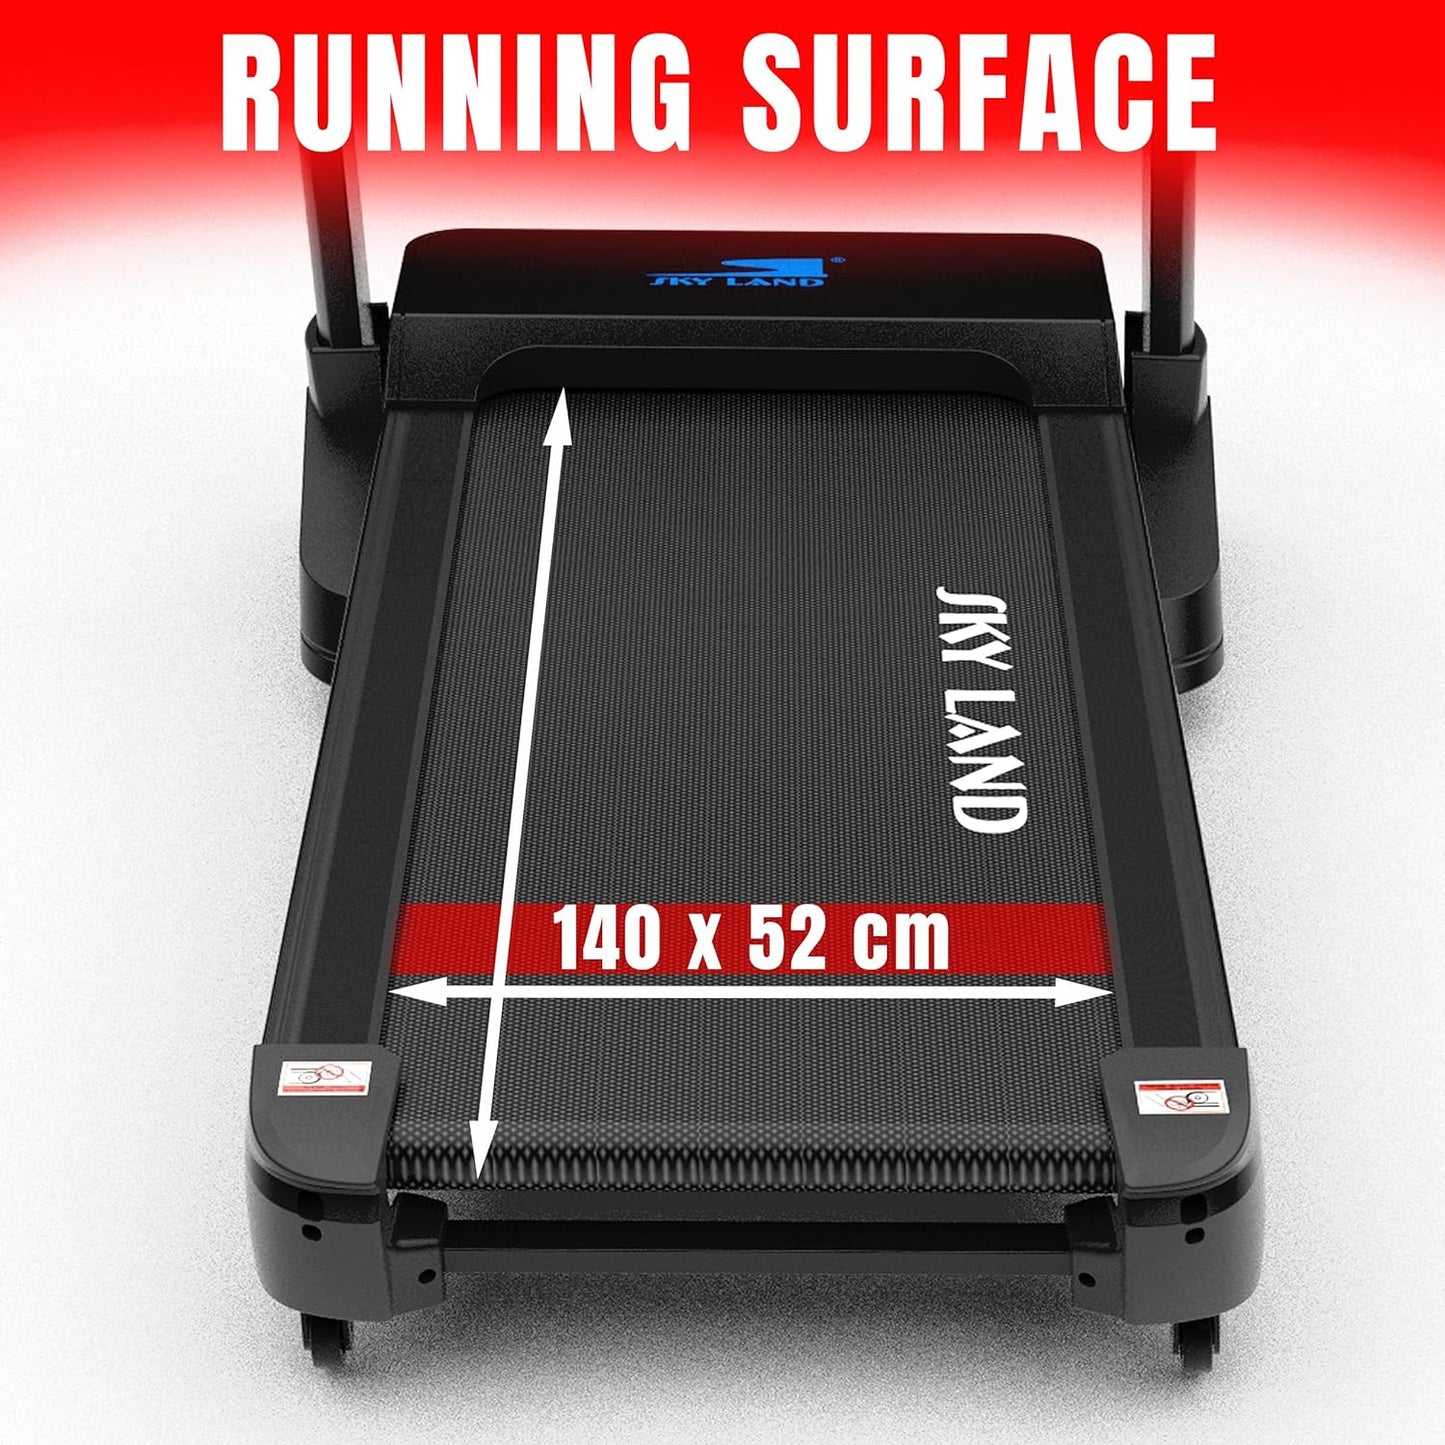 SKY LAND Fitness Treadmill - AC Motor Treadmill 7 HP Peak, Bluetooth, Auto Incline (20%), Max 150 kg - Premium Quality Treadmill for Home and Semi-Commercial Use | Treadmill With Multi App Support - COOLBABY